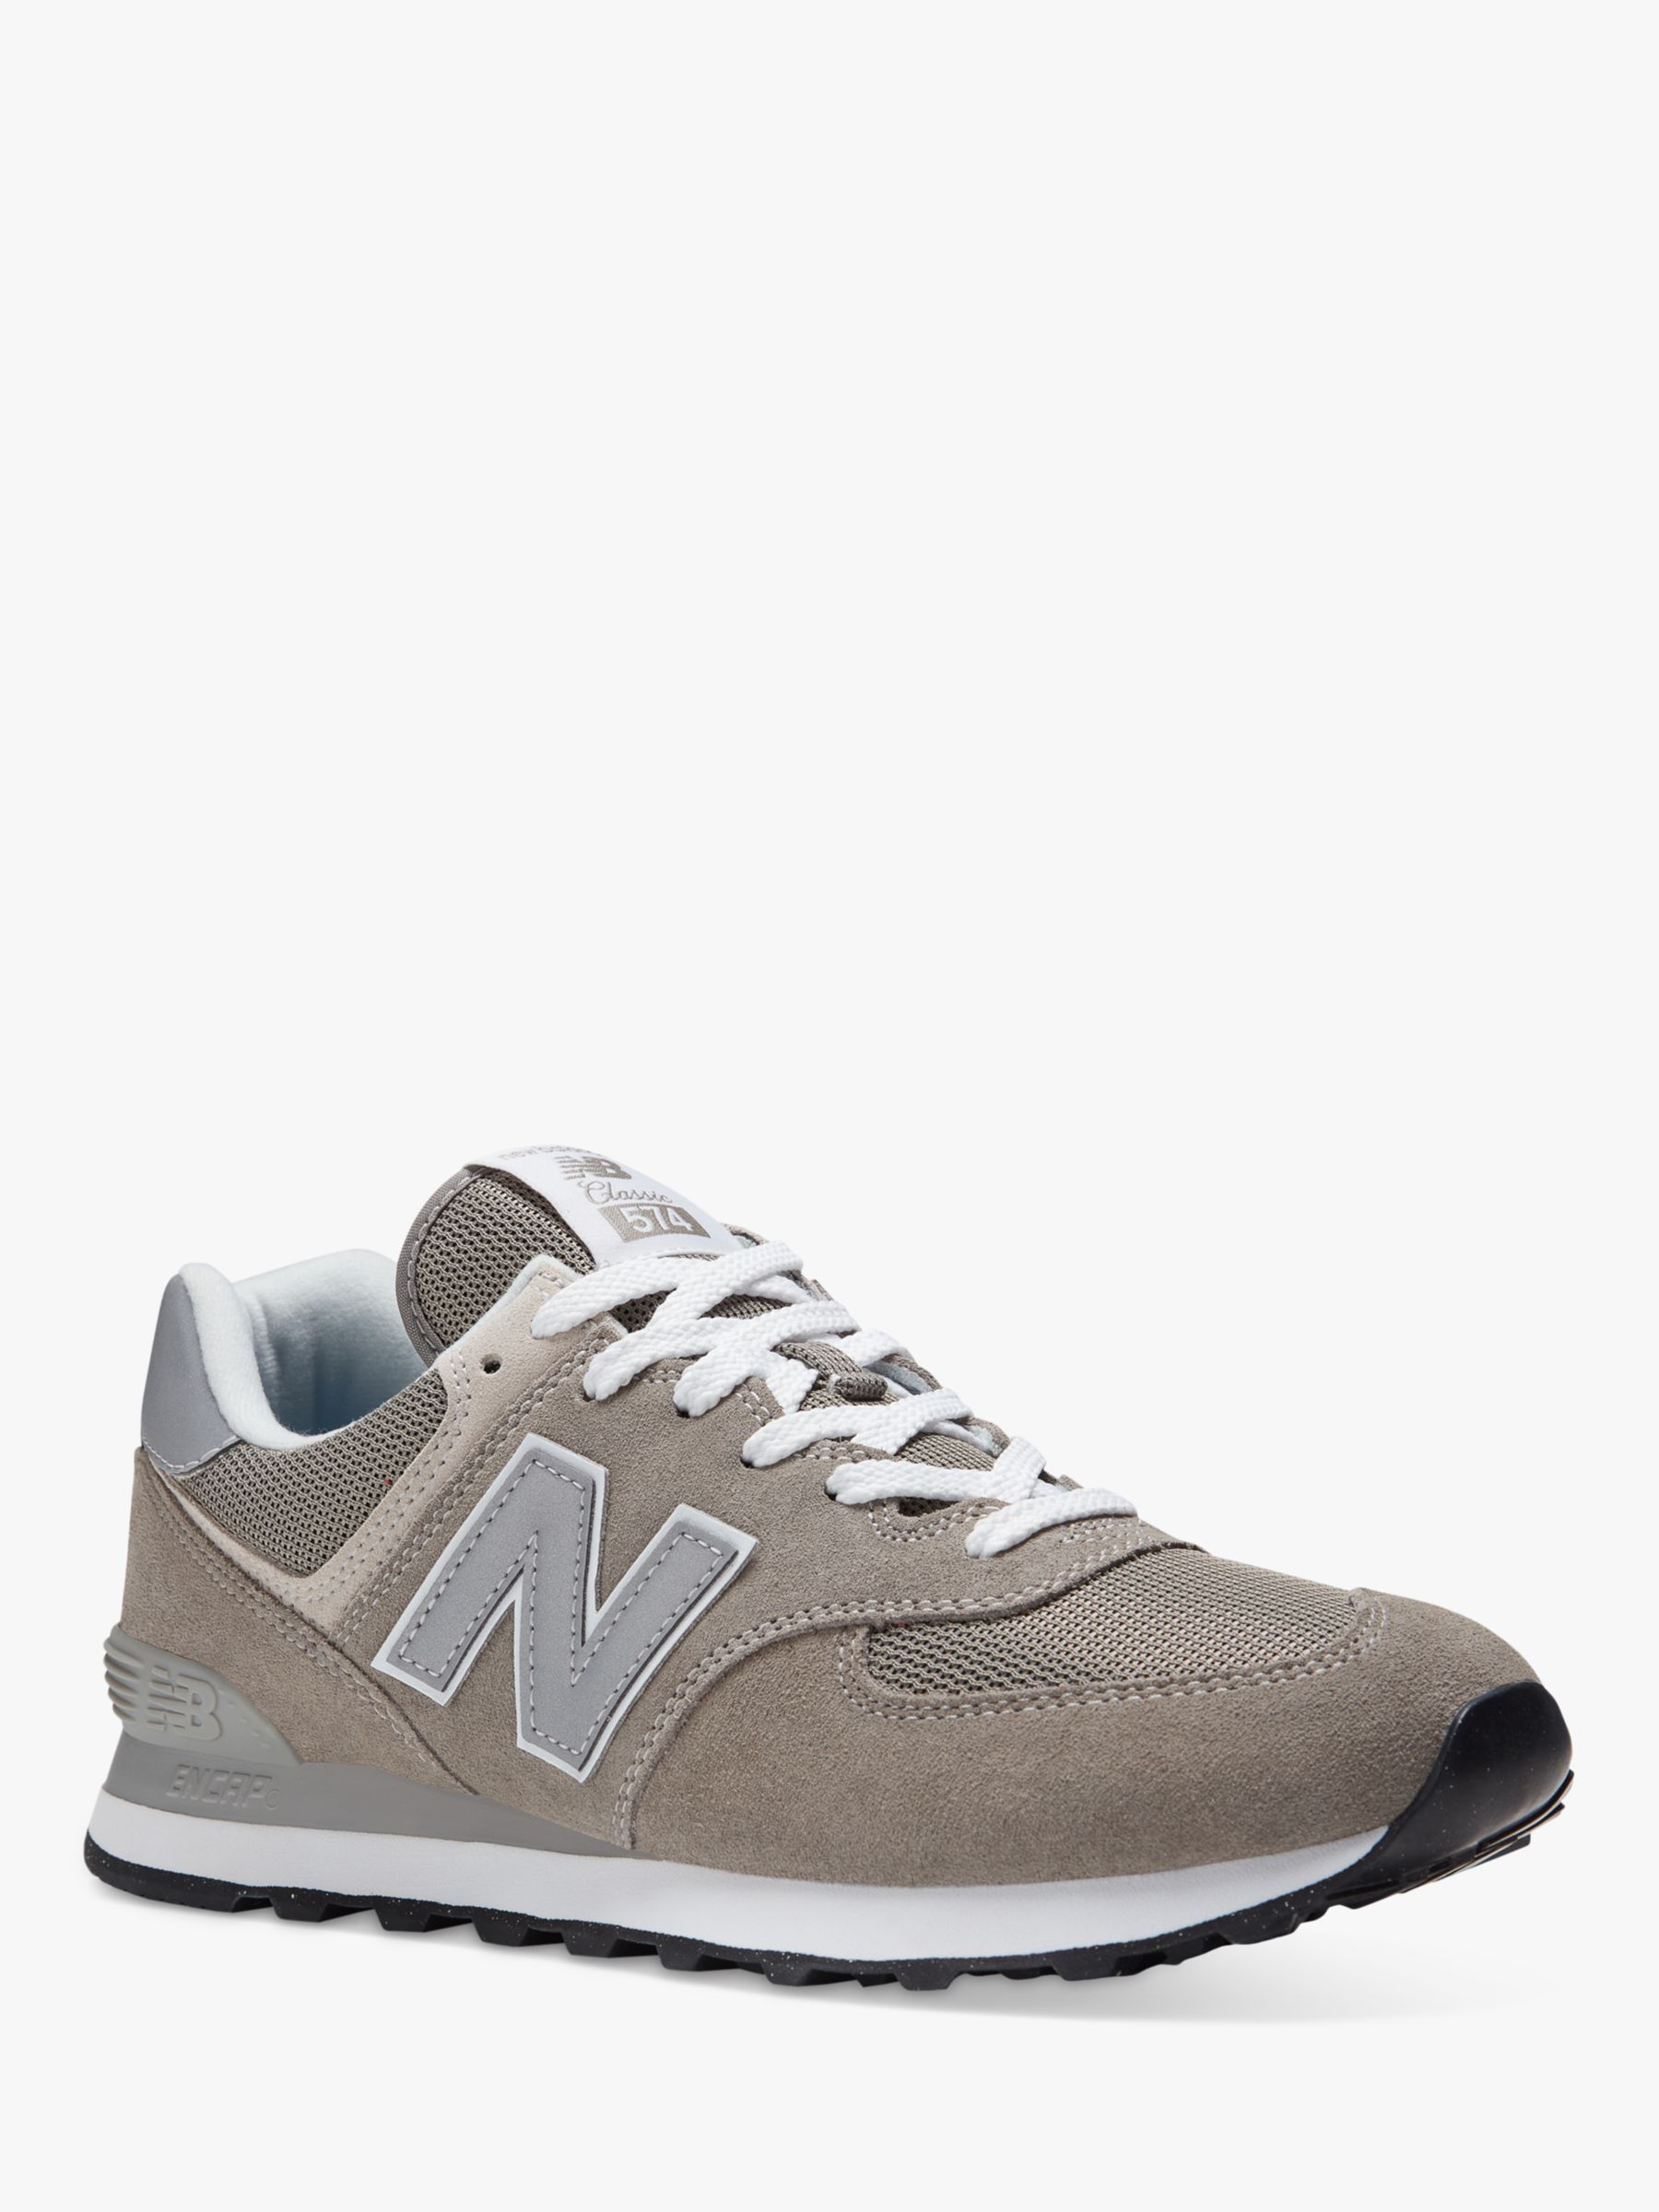 New Balance 574 Suede Trainers, Grey/White at John Lewis u0026 Partners